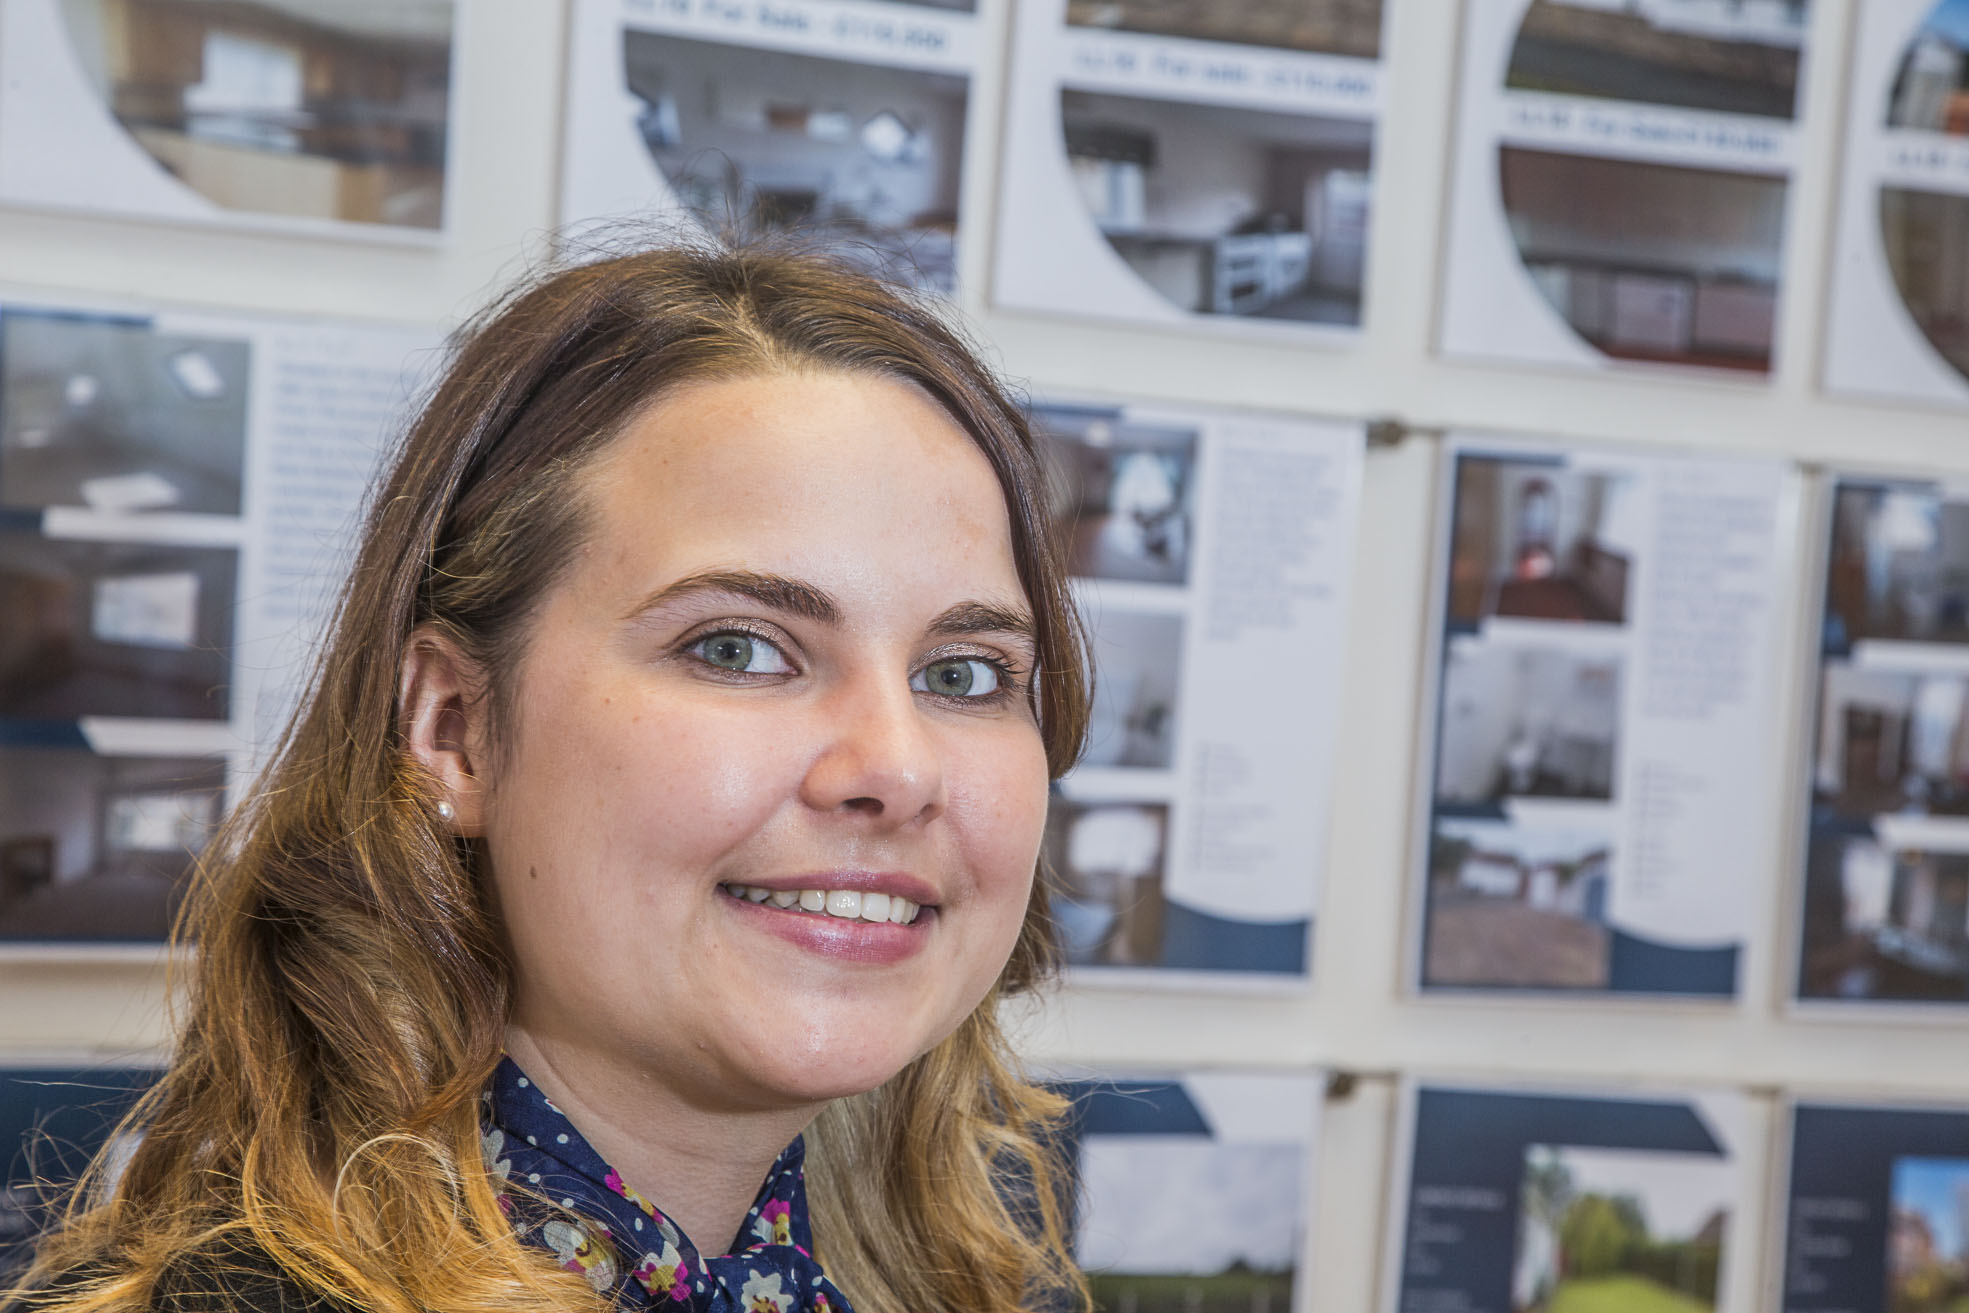 Ambitious young Katie earns top job at Elwy